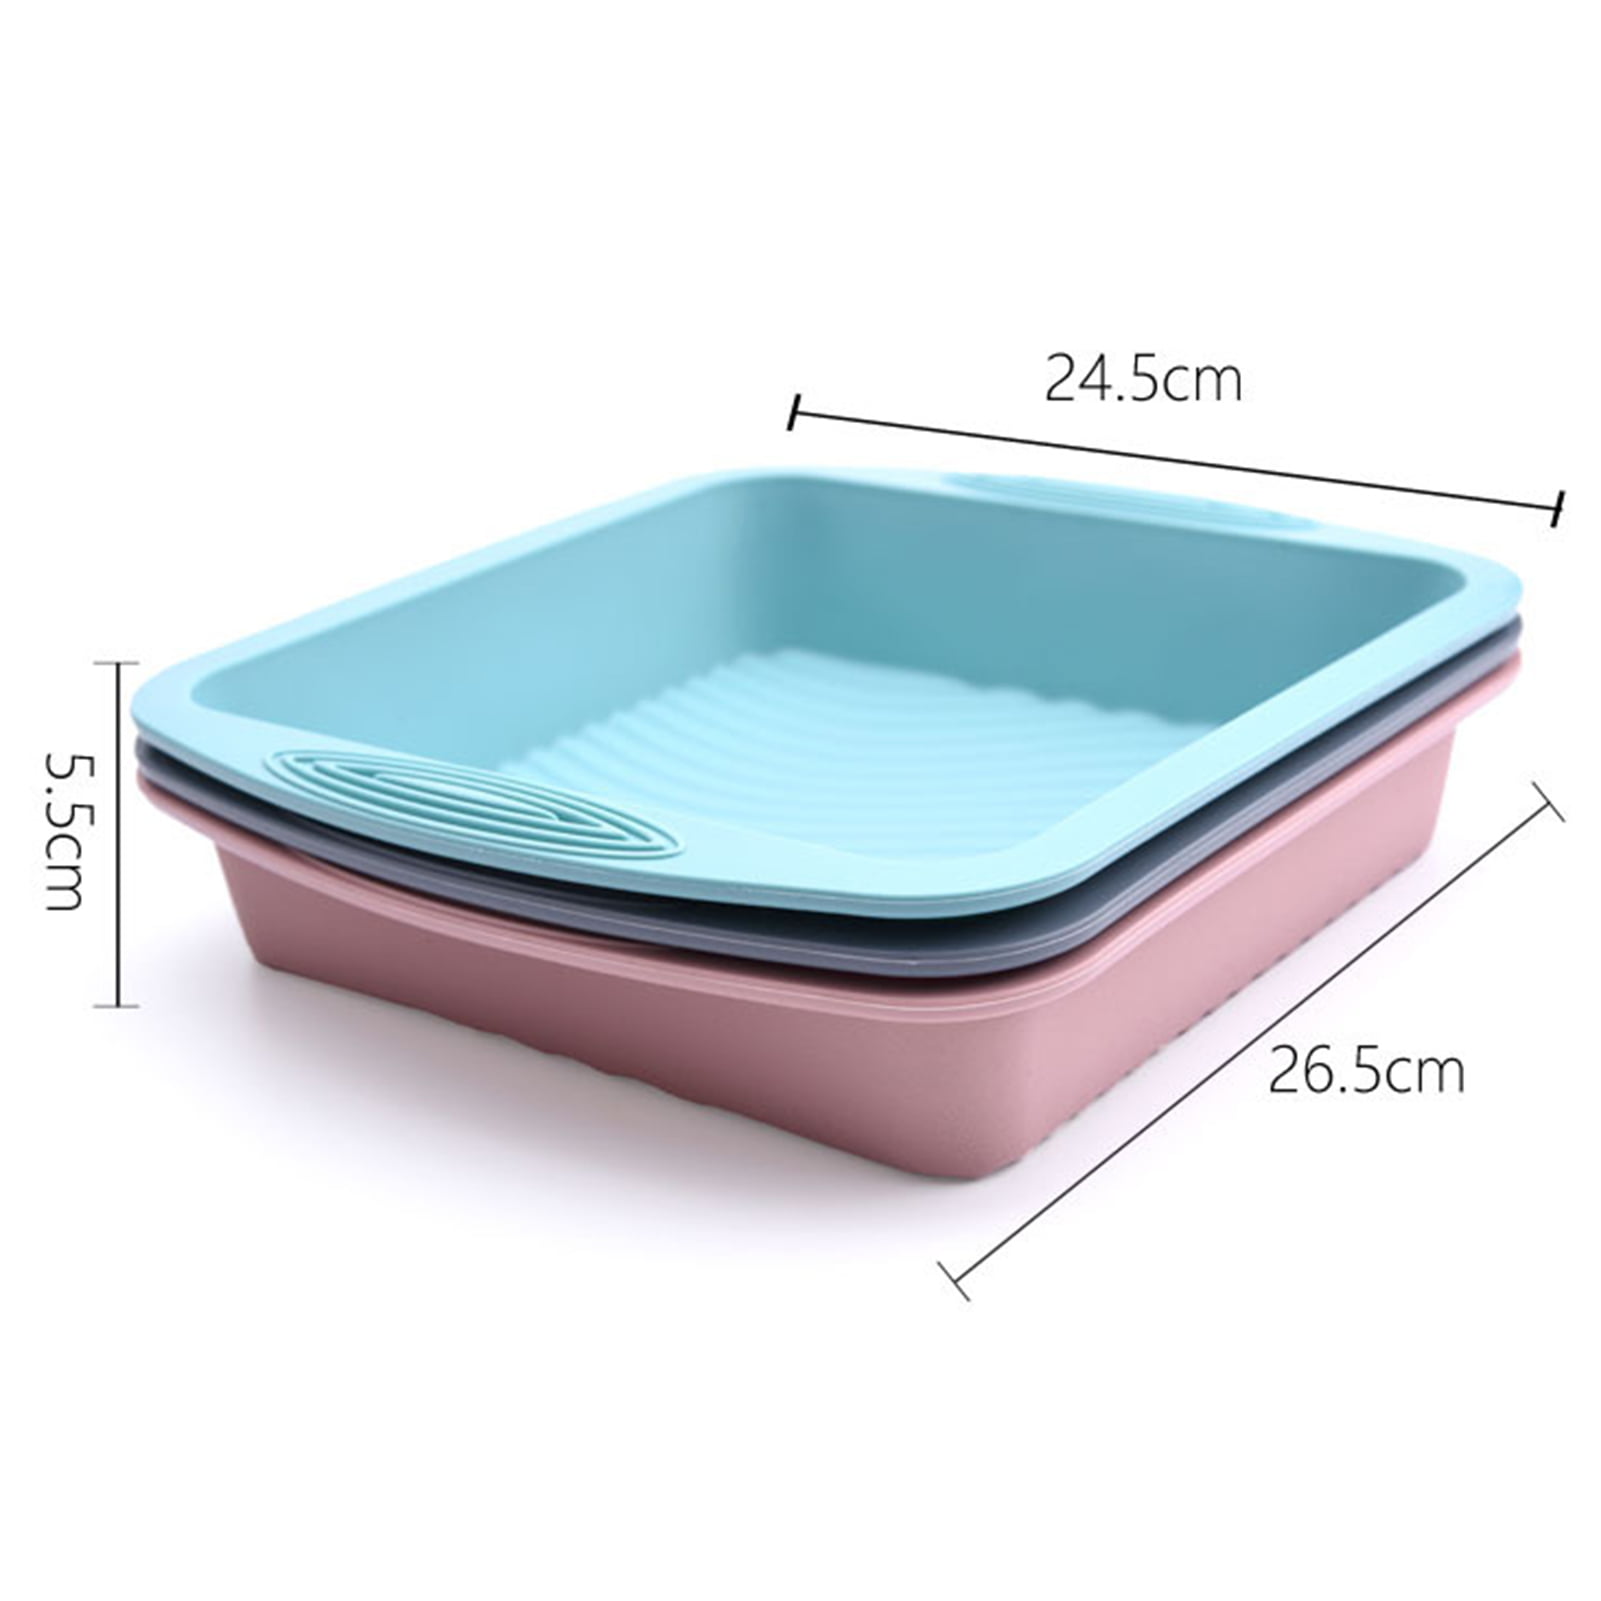  COOKSTYLE 8x8 Baking Pan, 2 Pack Silicone Pans for